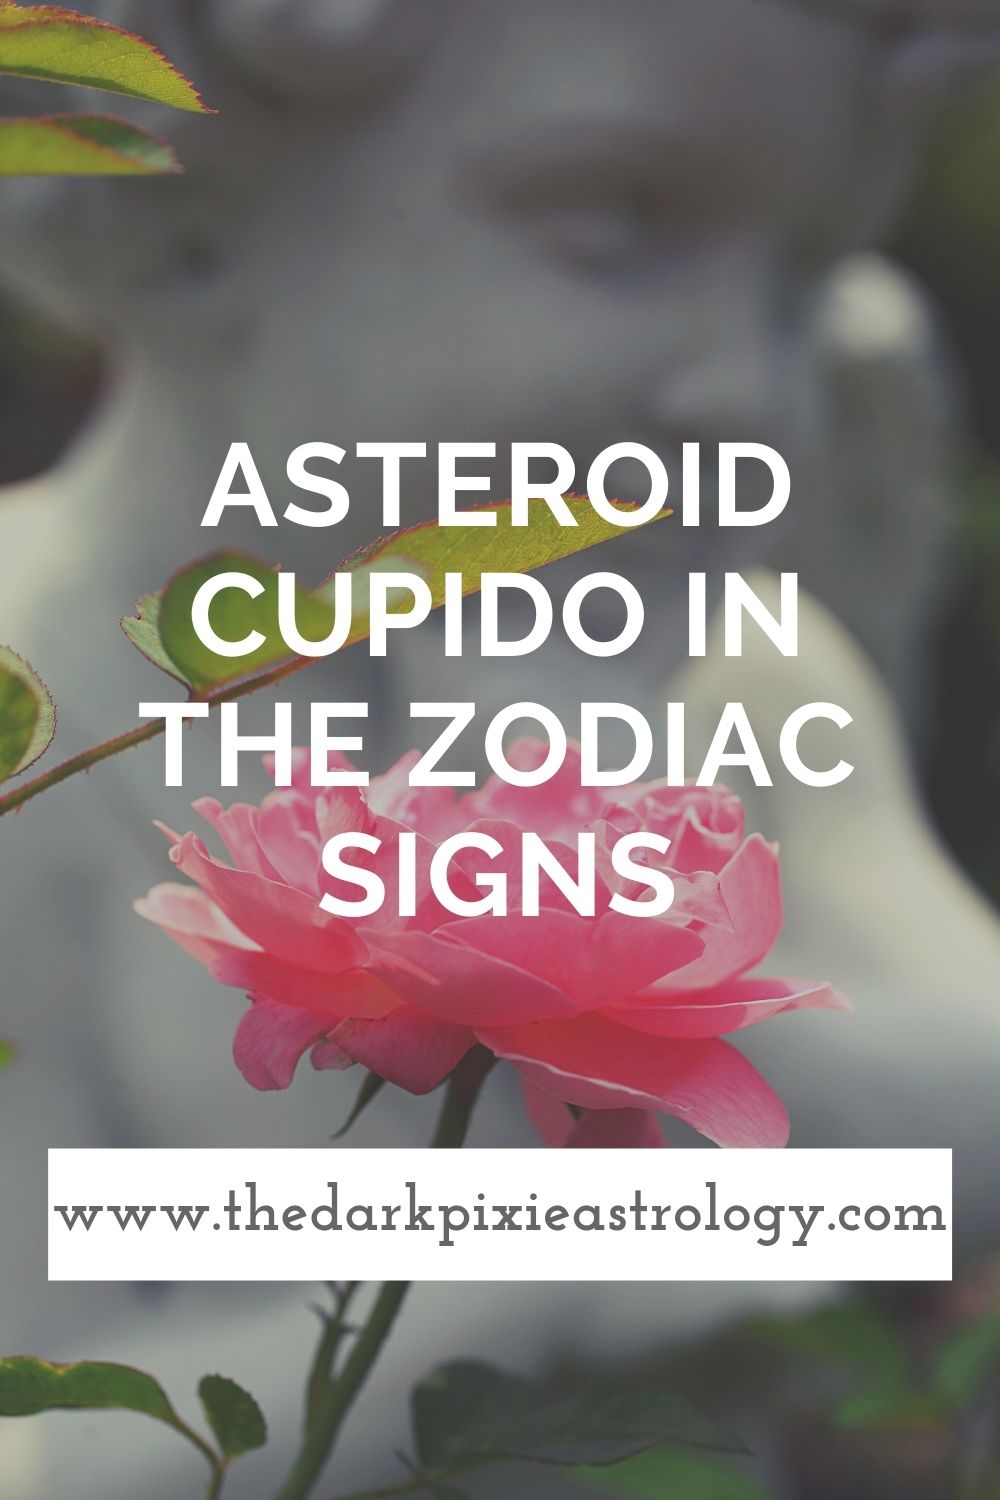 Asteroid Cupido in the Zodiac Signs - The Dark Pixie Astrology